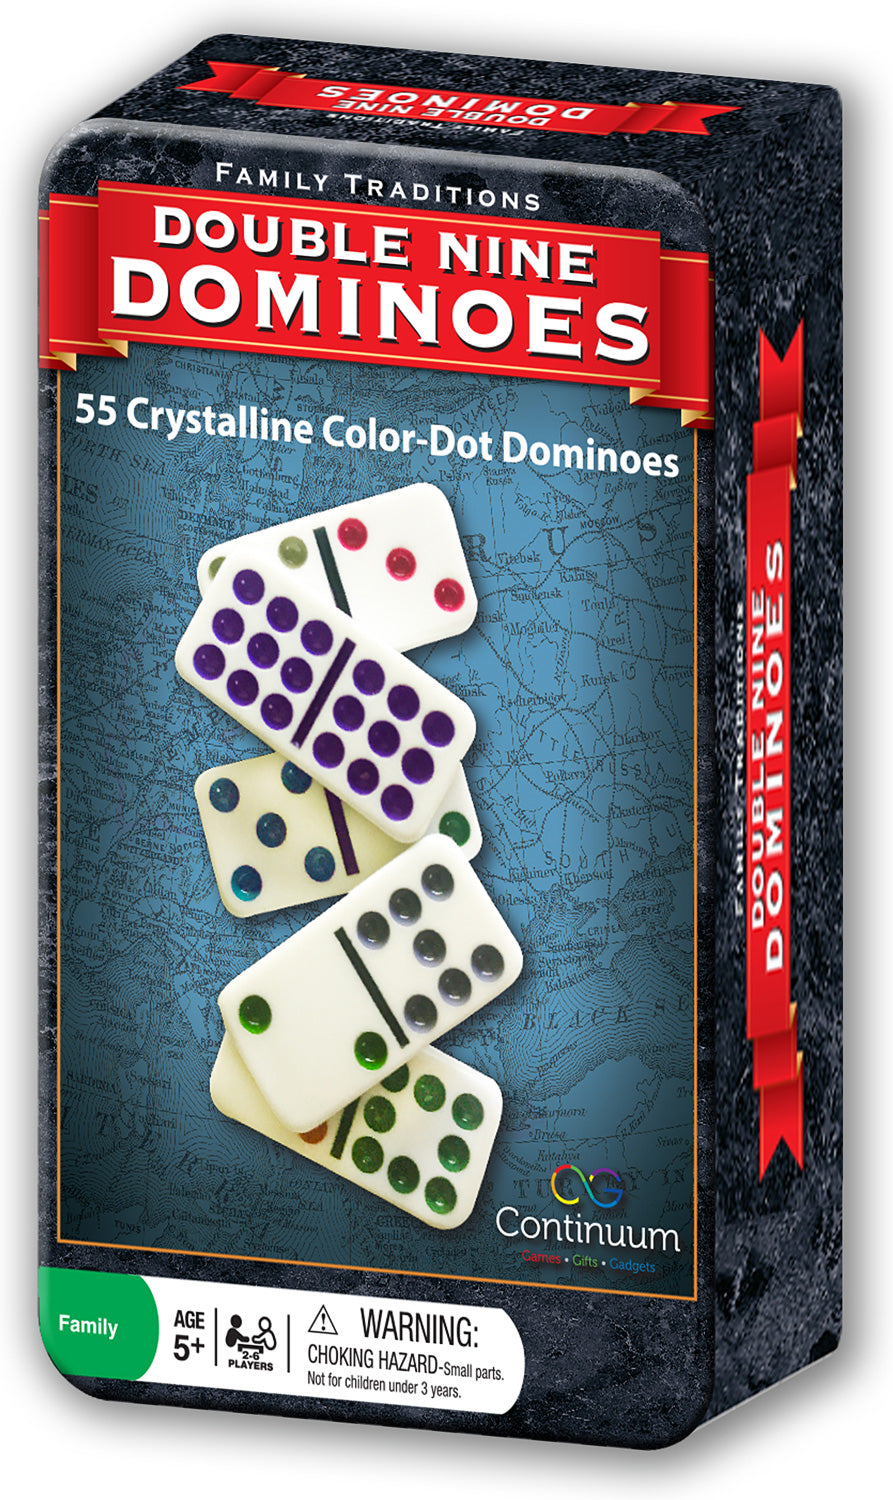 Family Traditions: Double Nine Dominoes Tin